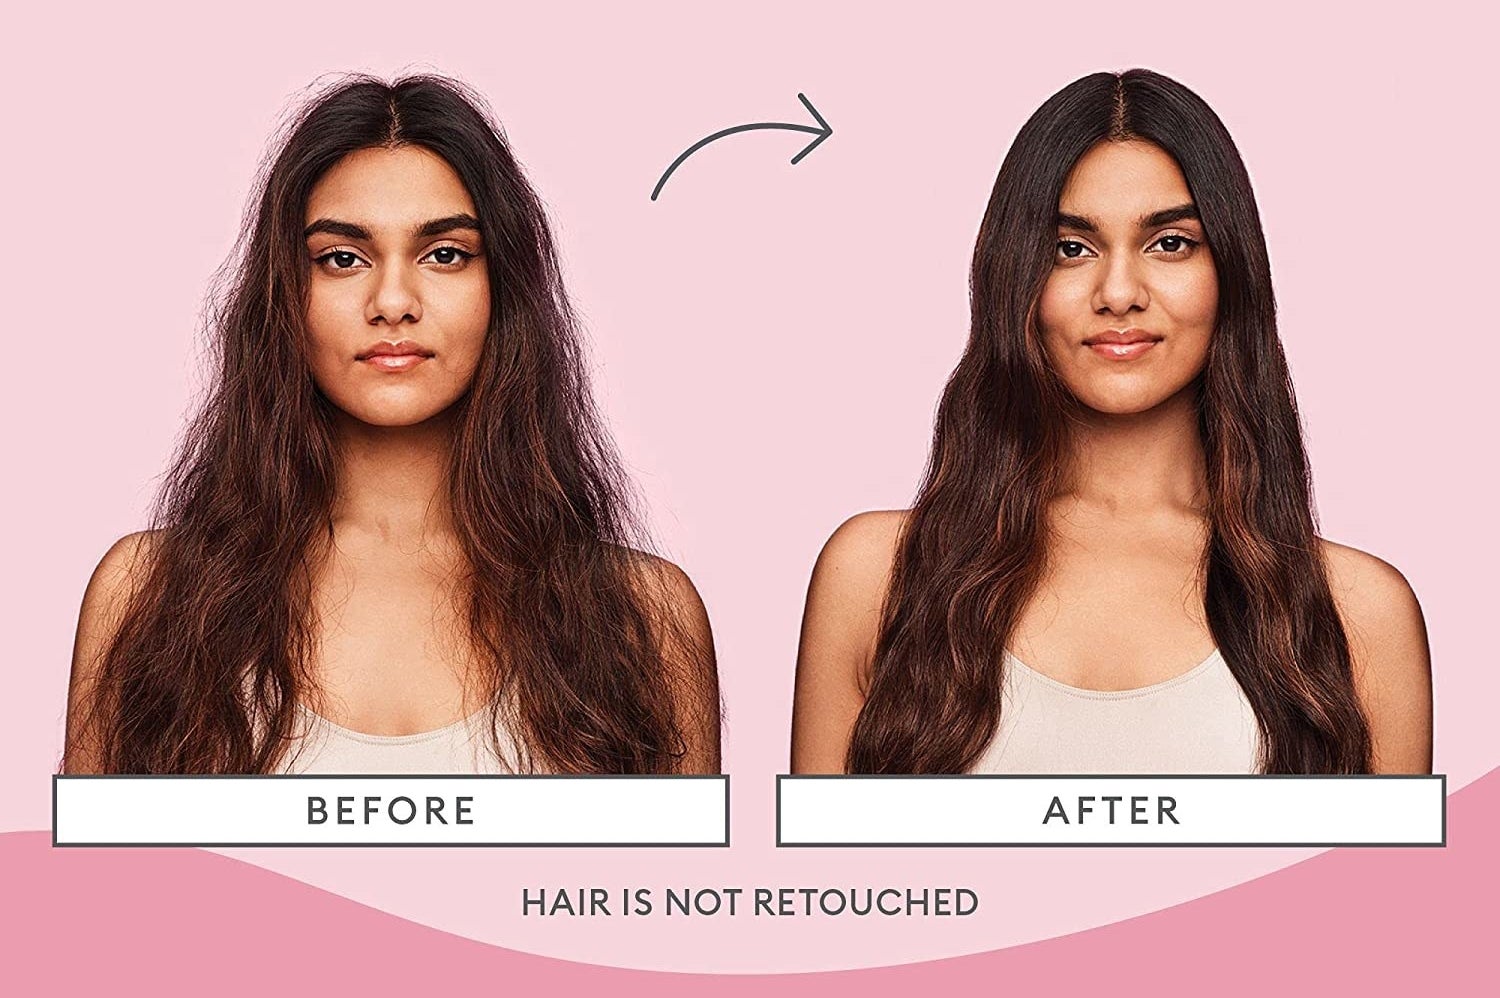 Model showing before-and-after results of using the spray, which made their hair look more smooth and less frizzy